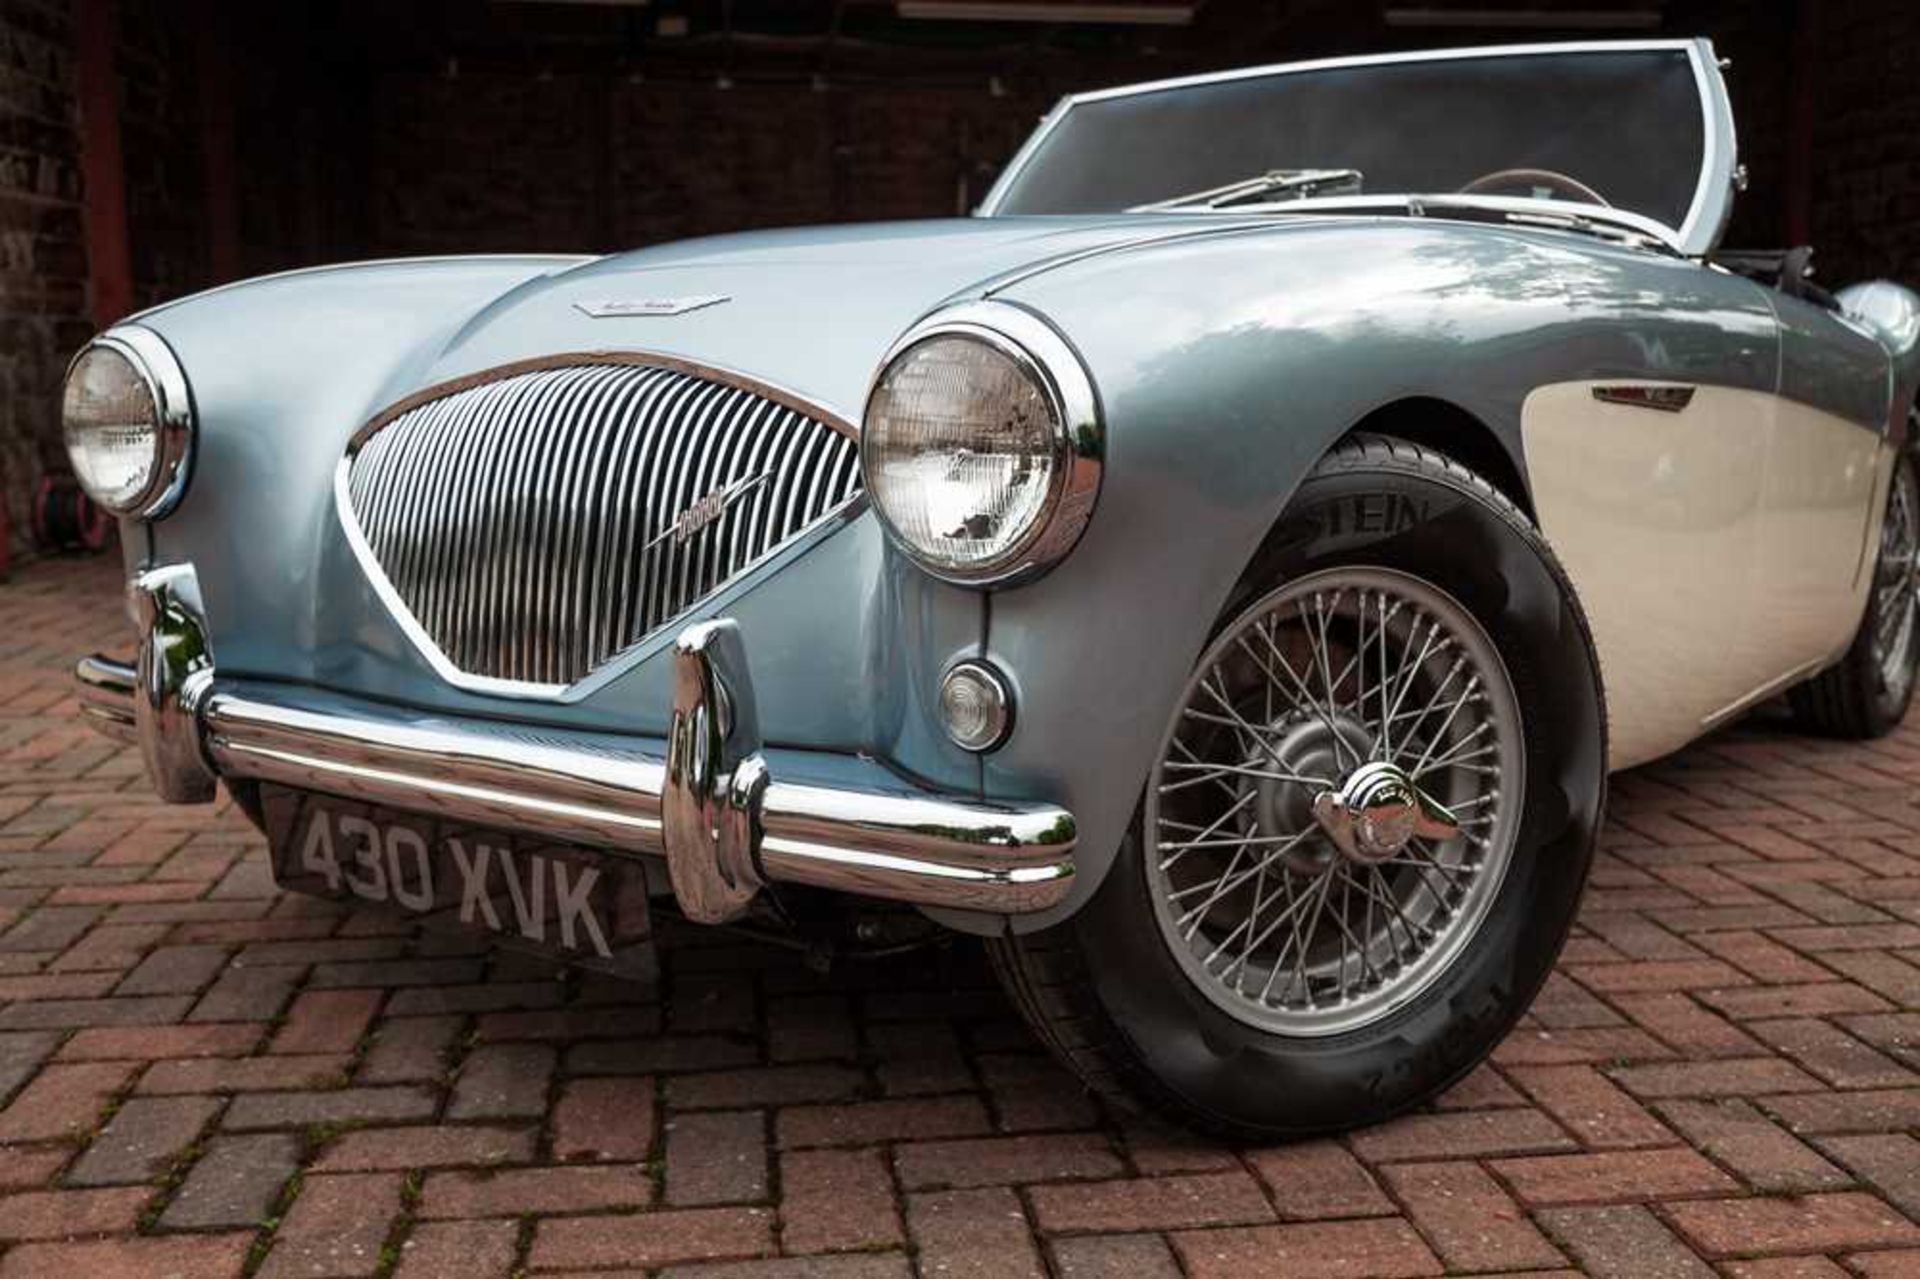 1955 Austin-Healey 100/4 Subtly Upgraded with 5-Speed Transmission and Front Disc Brakes - Image 40 of 54